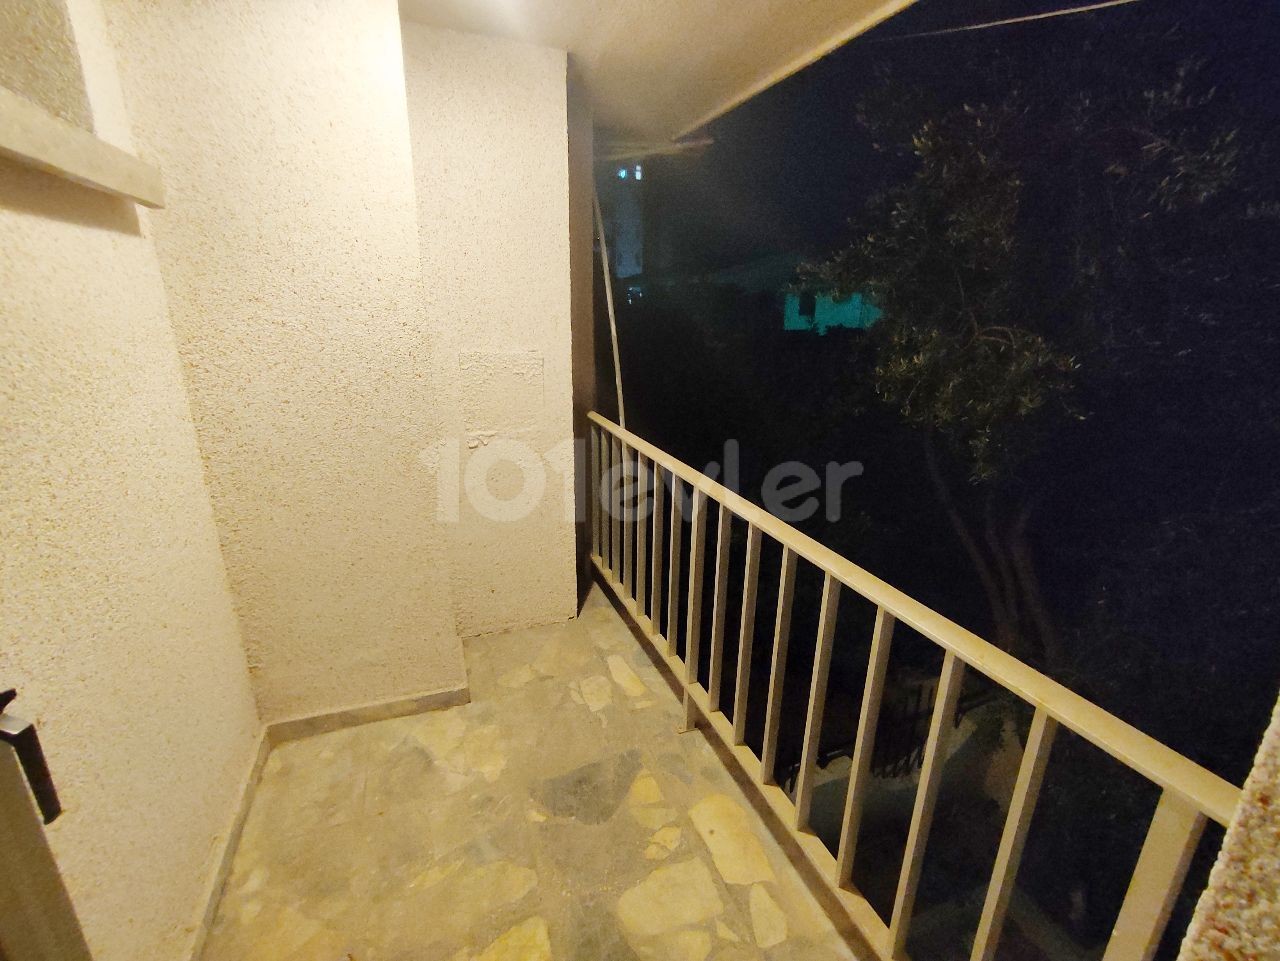 Spacious 3 Bedroom Semi Detached House for Rent in the Center of Kyrenia